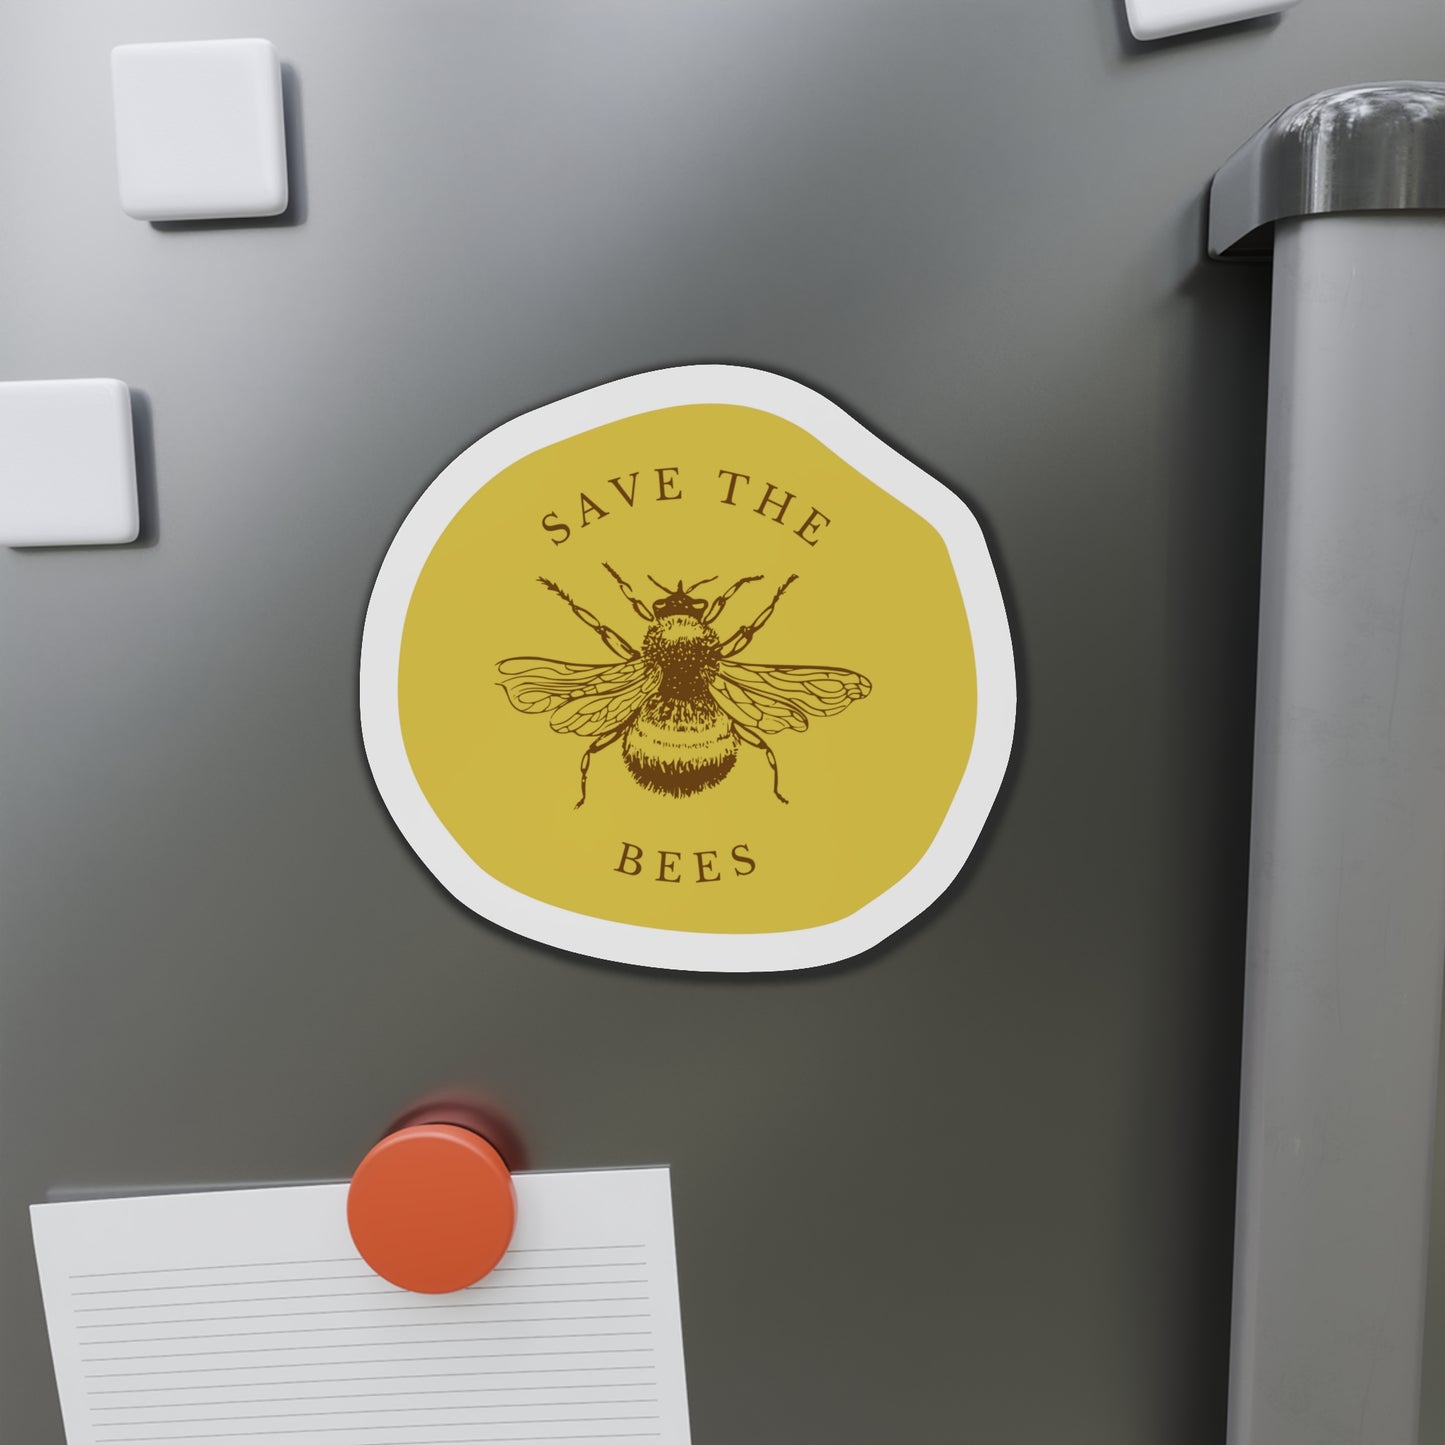 Save The Bees Magnets